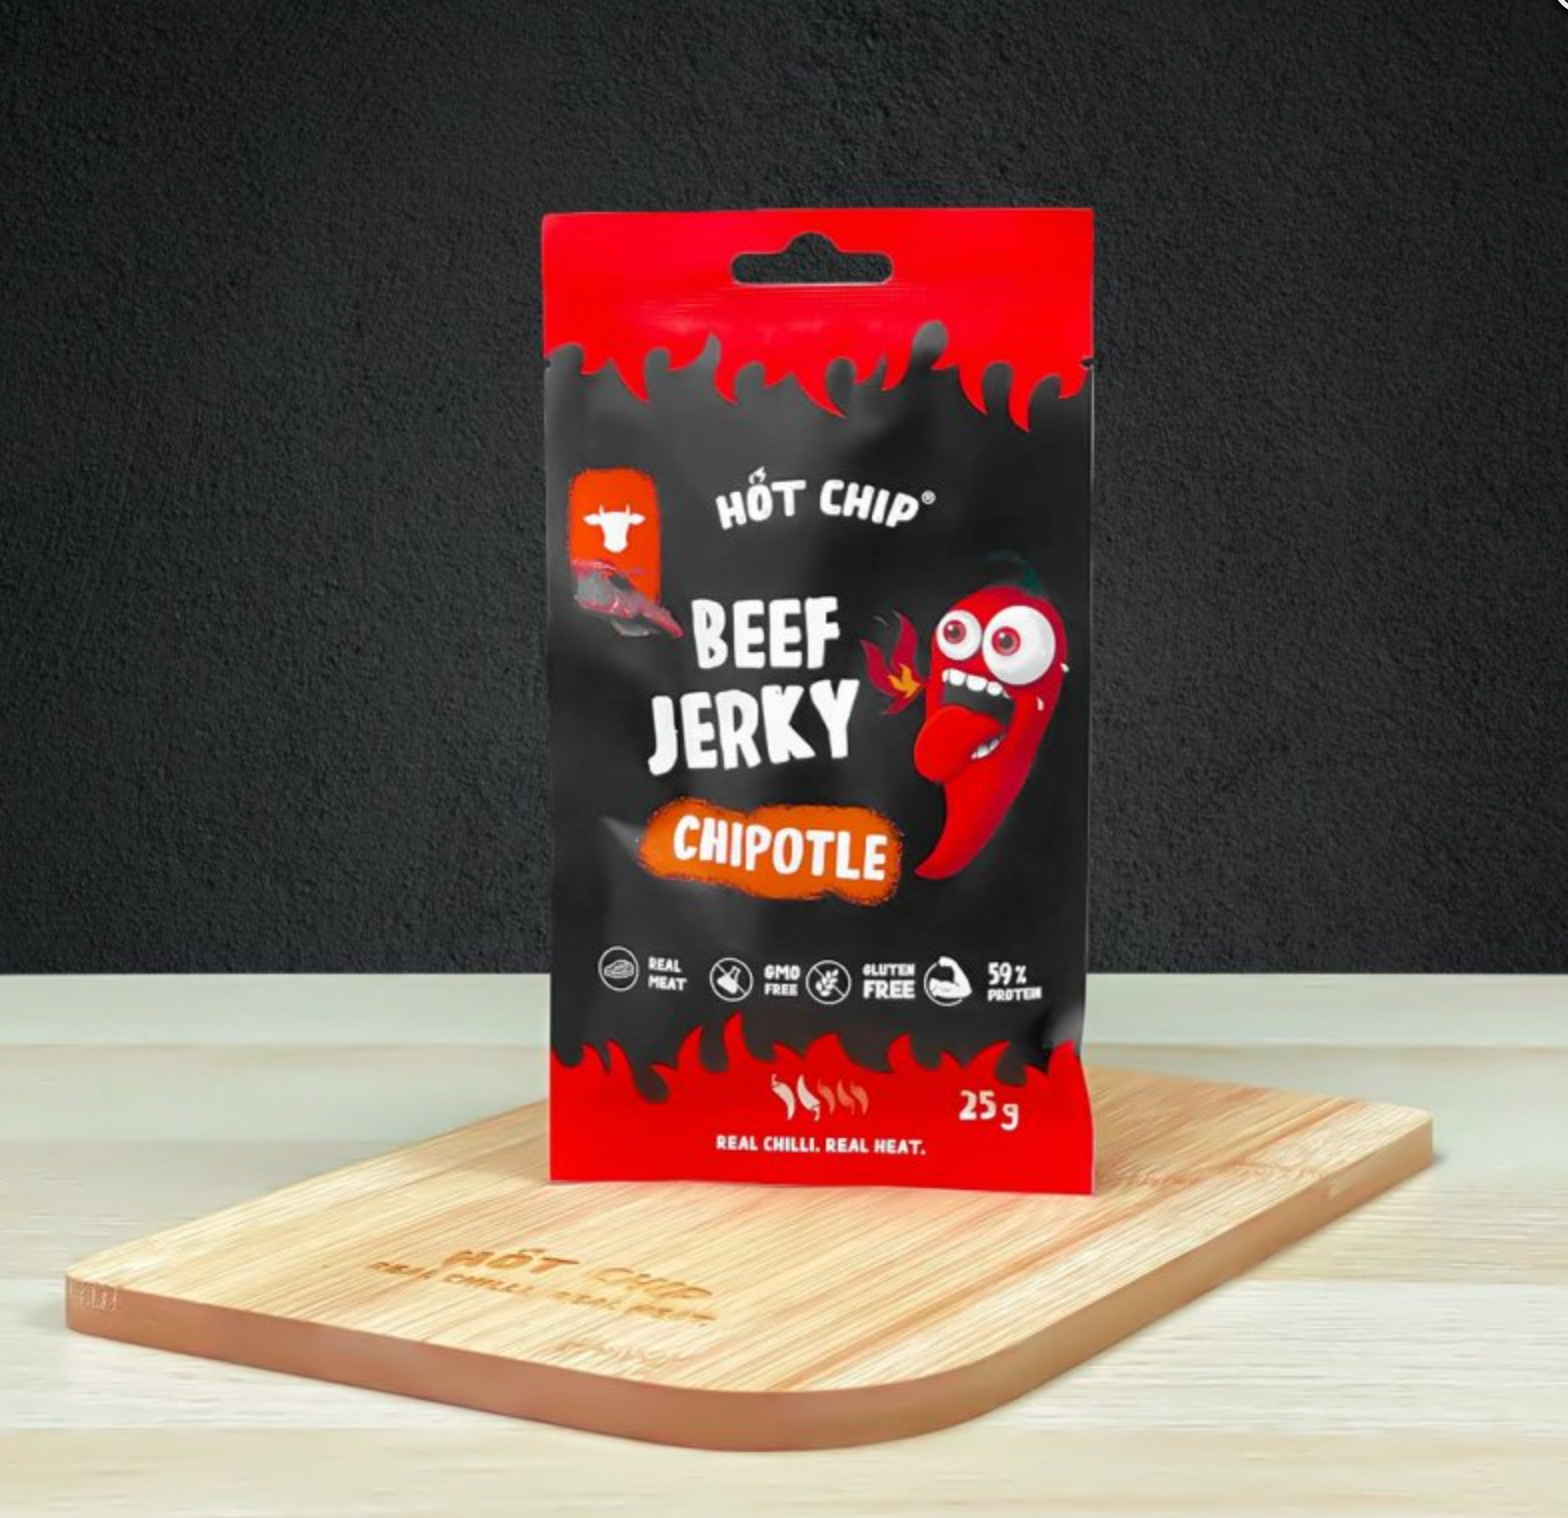 Hot Chip Beef Jerky Chipotle - My American Shop